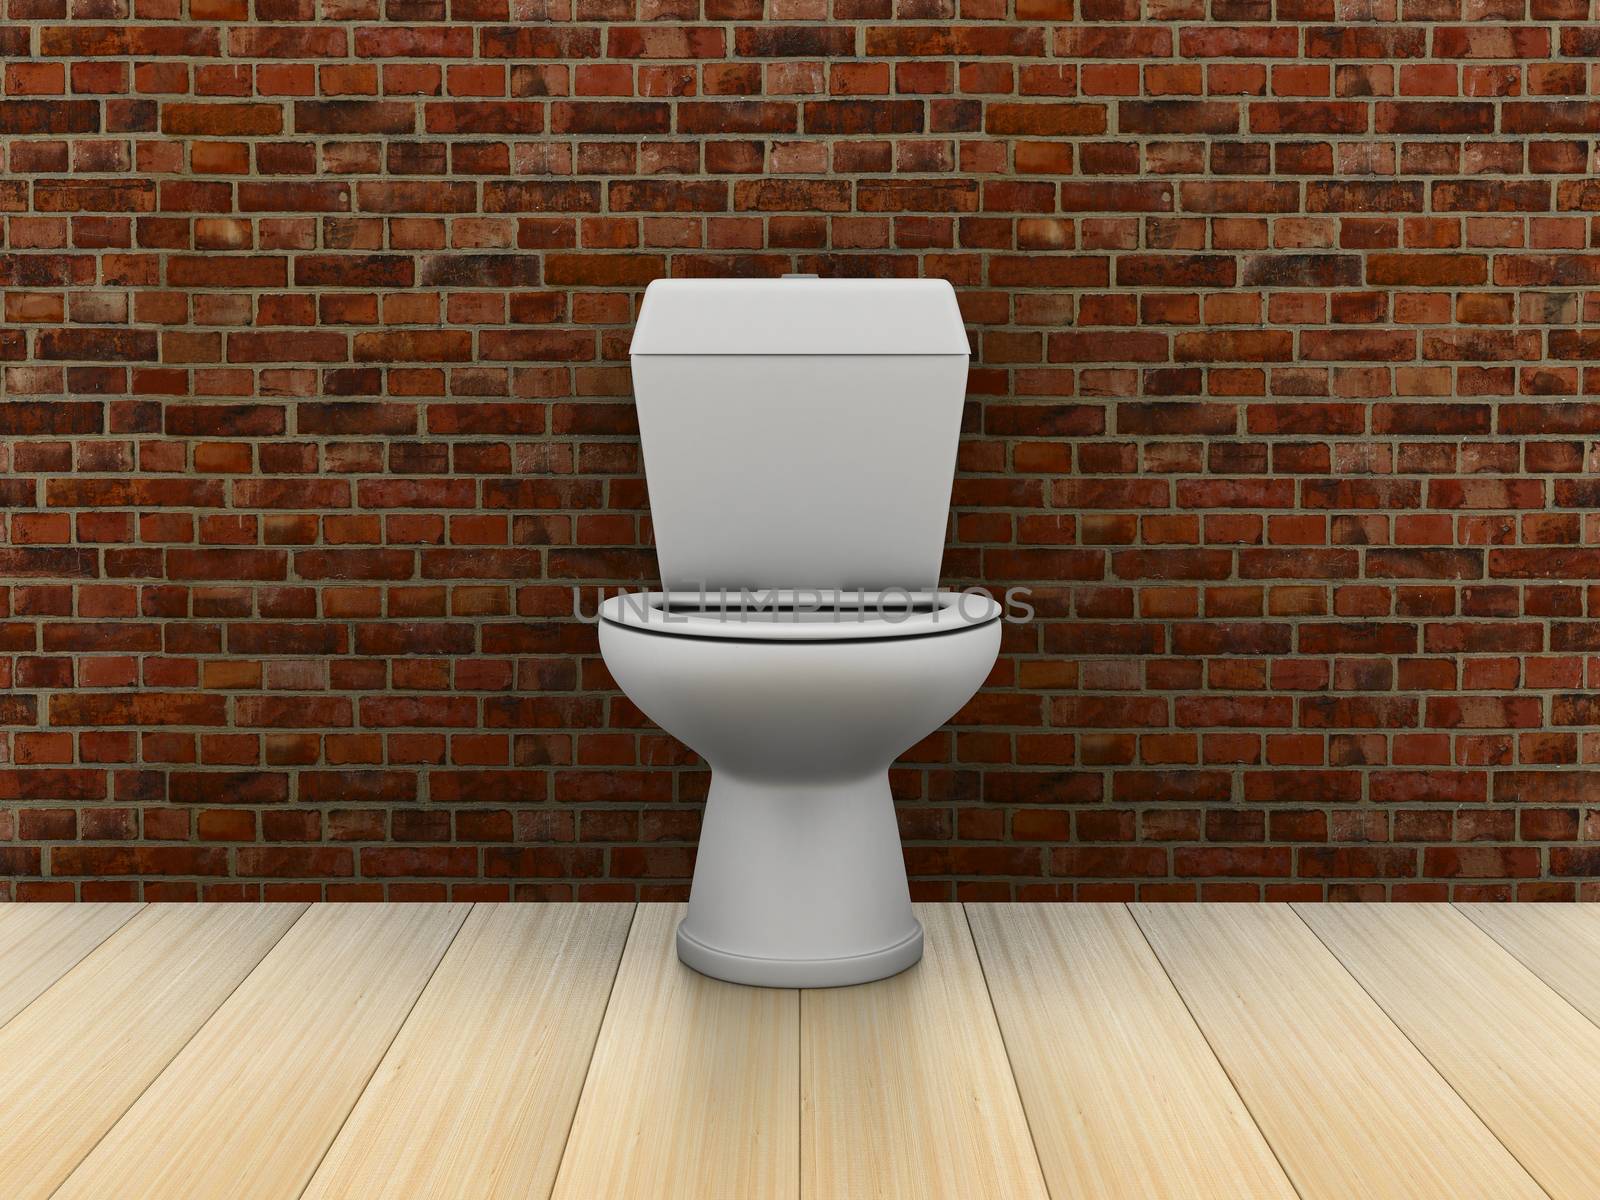 Room with water closet. 3D image